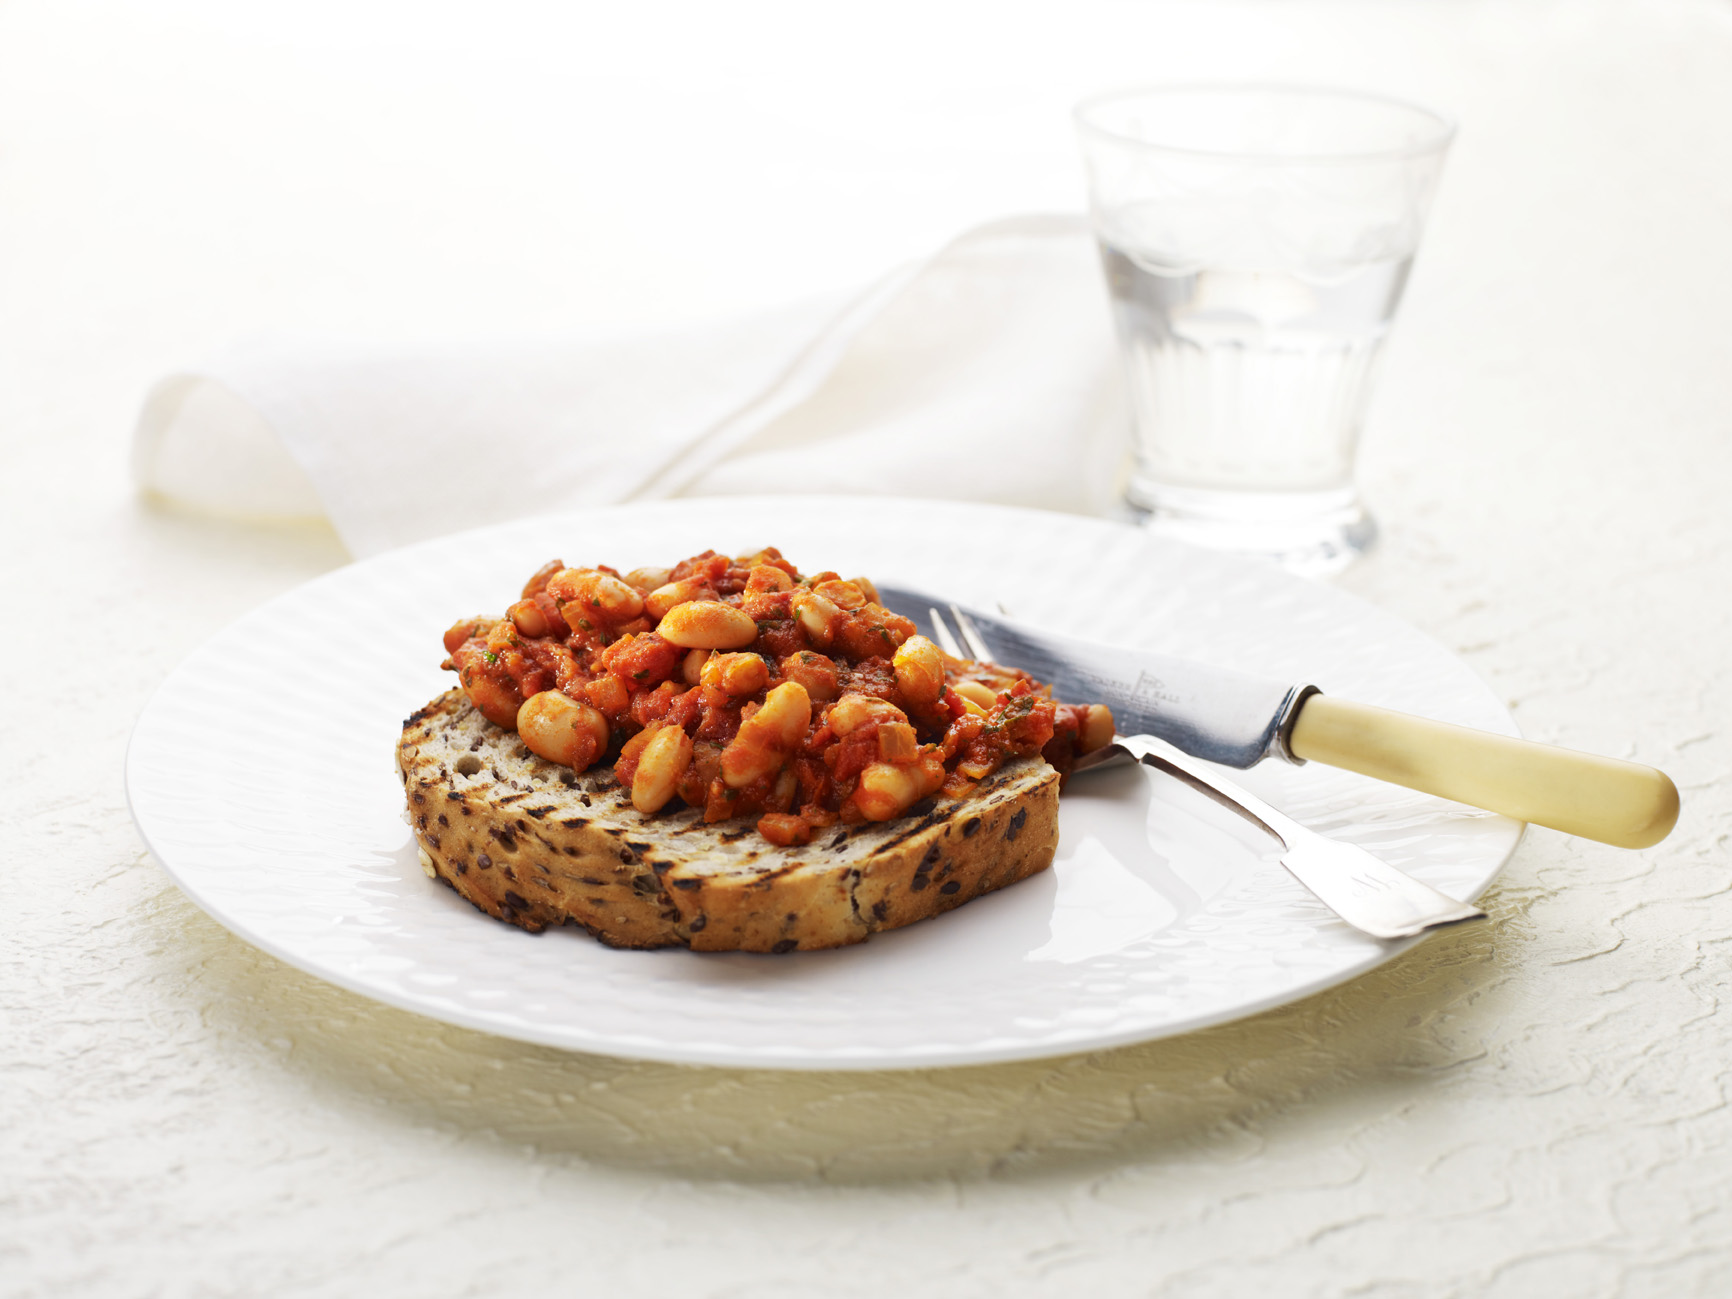 A close up of a white china plate with a slice of multigrain toast, topped with a tomato bean mix. A knife and fork are on the plate. In the background is an out of focus white tea towel and a glass of water.